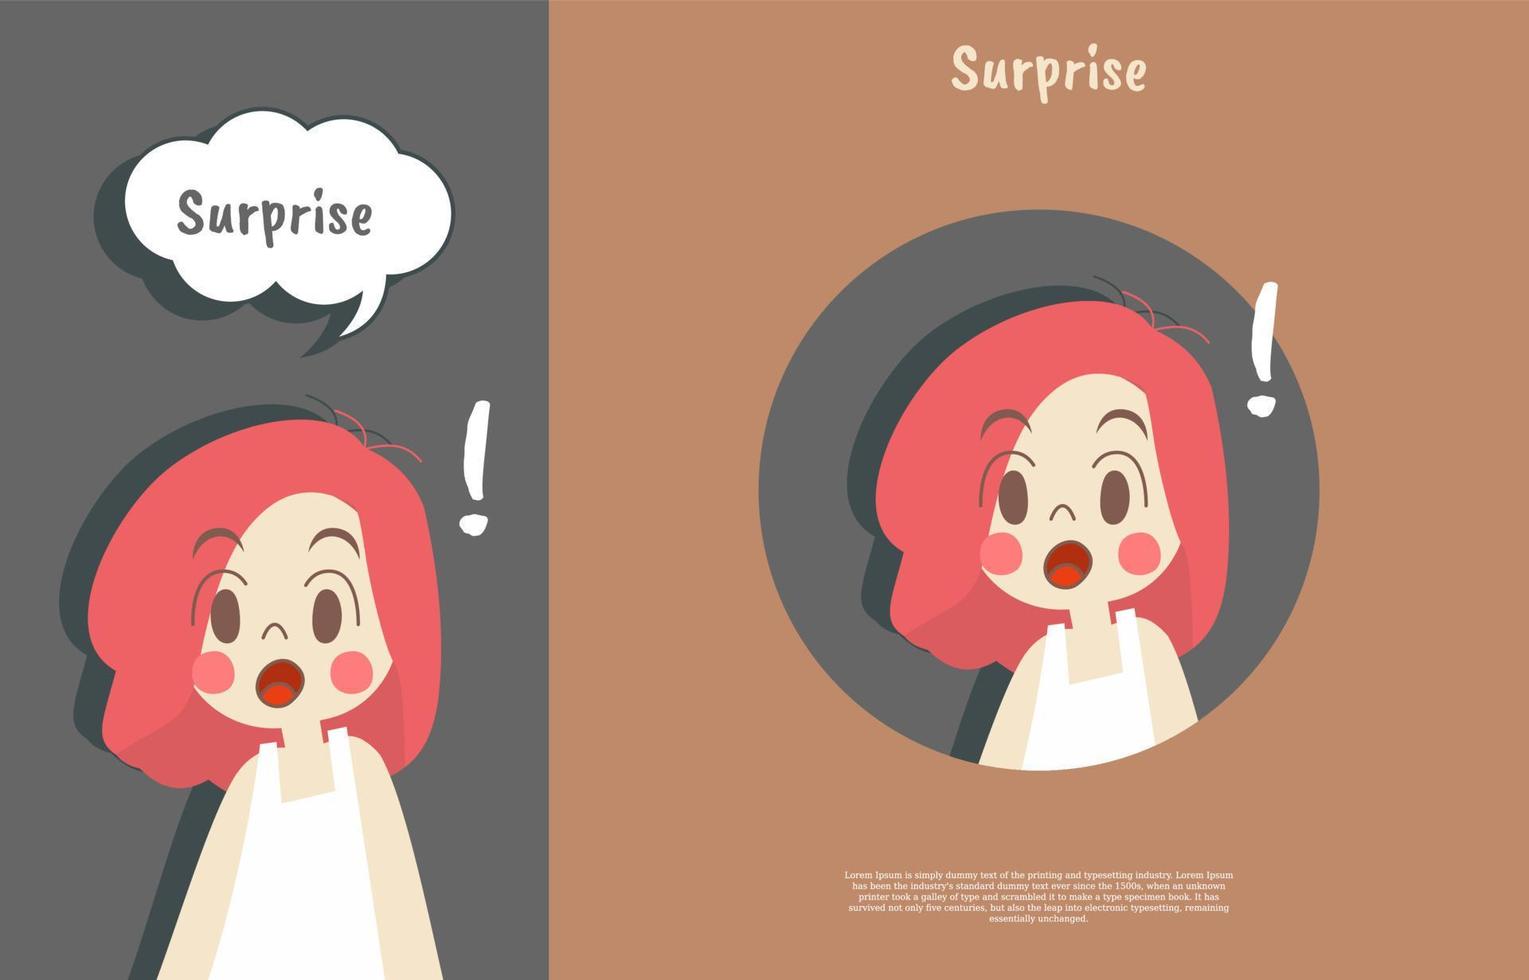 cute face surprise expressions with names. phone wallpaper and sticker flat design illustration vector